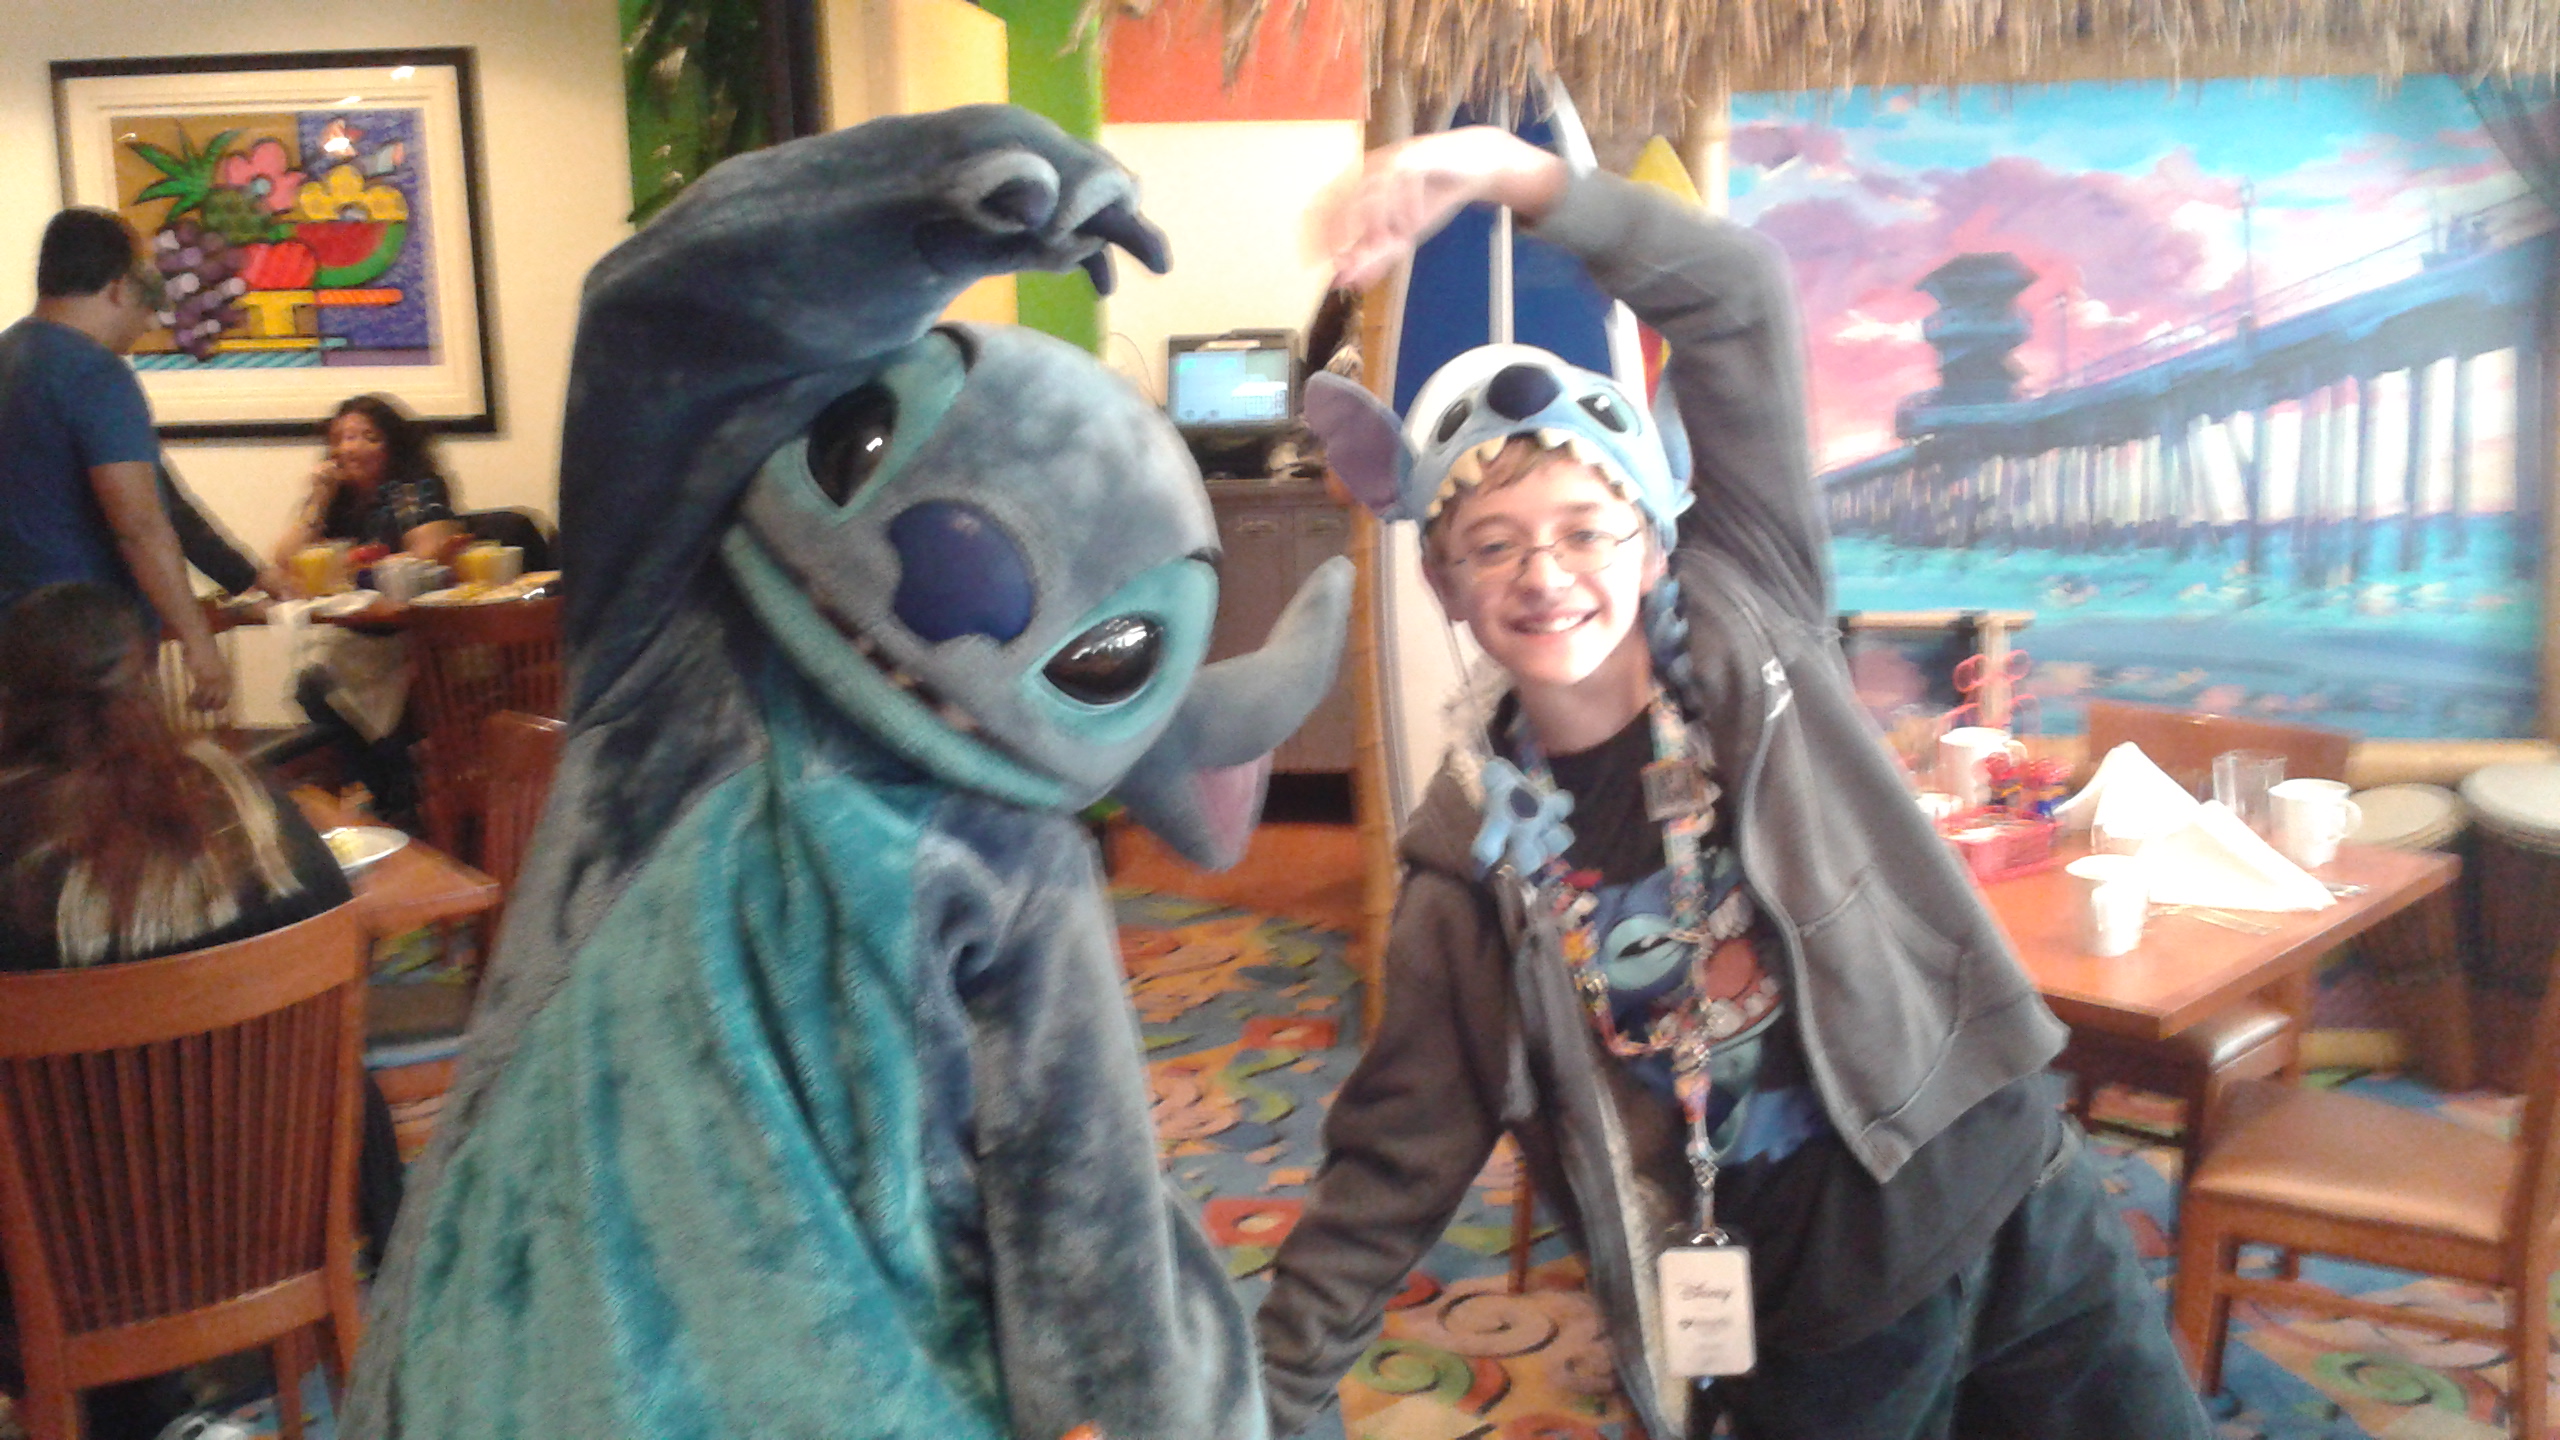 Meeting Stitch at the Mickey and Friends Surf’s Up Breakfast at the Disneyland Resort